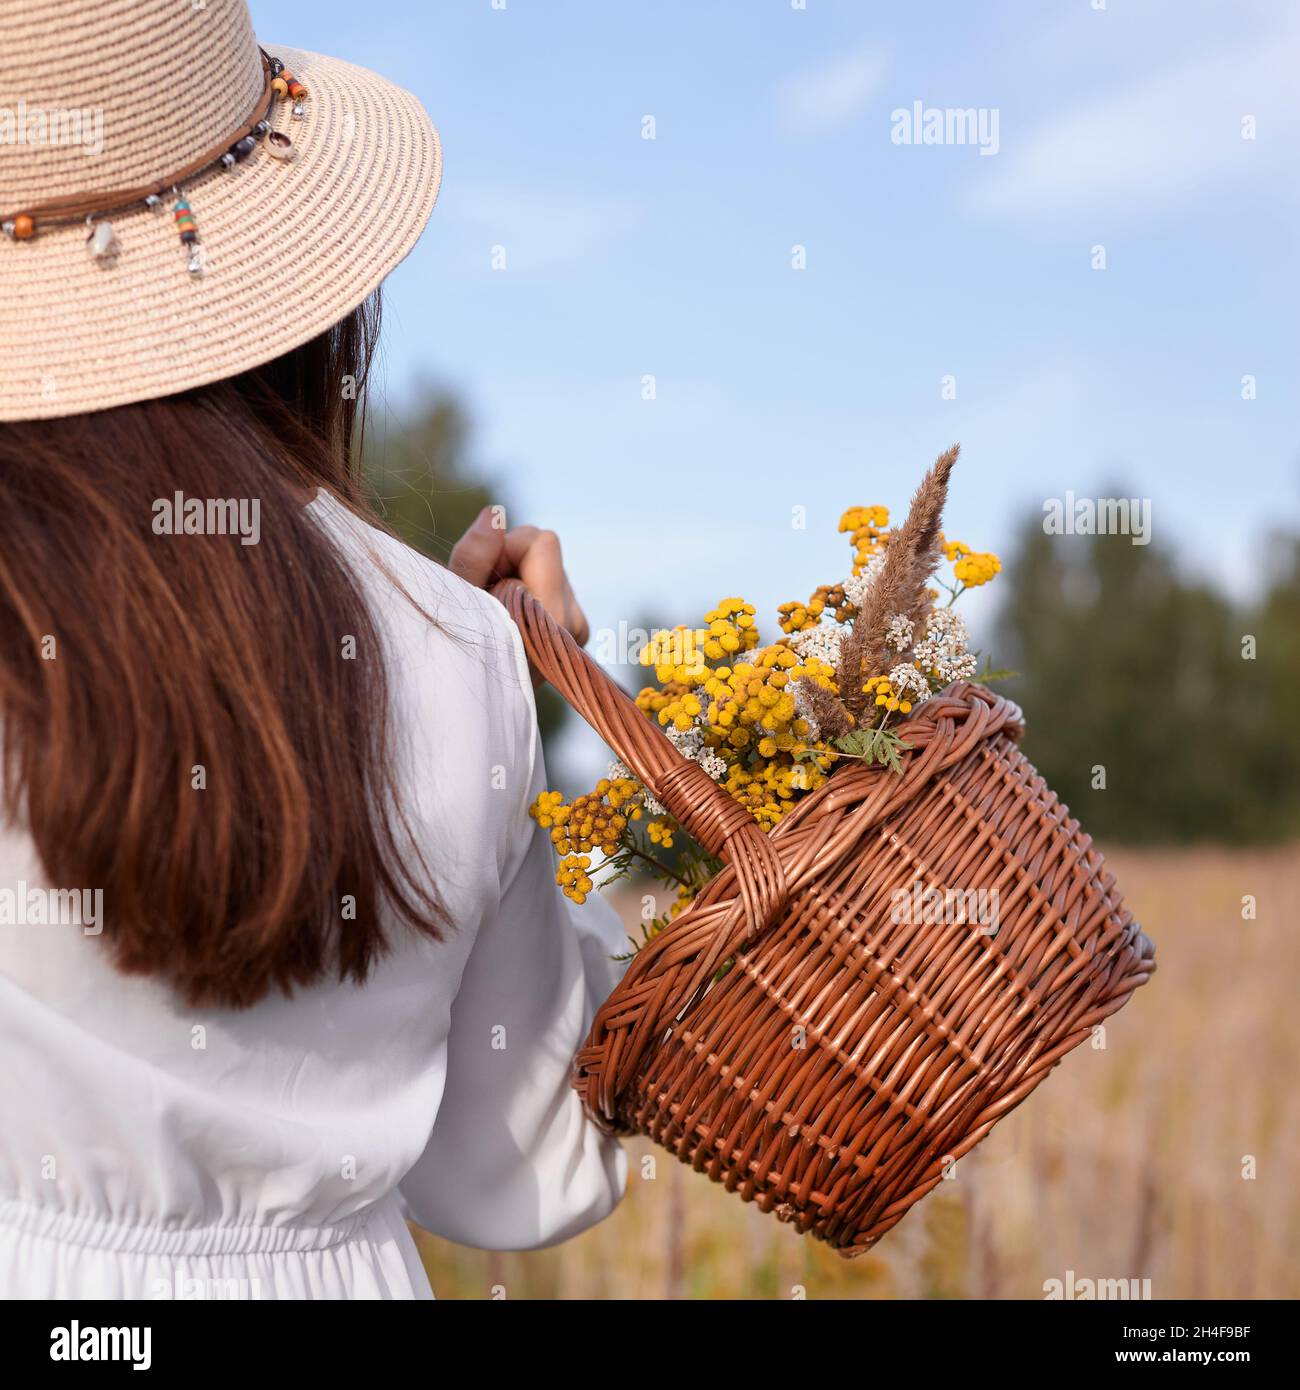 Woman sholding basket of wild flowers. Woman picking flowers / herbs in nature. Stock Photo